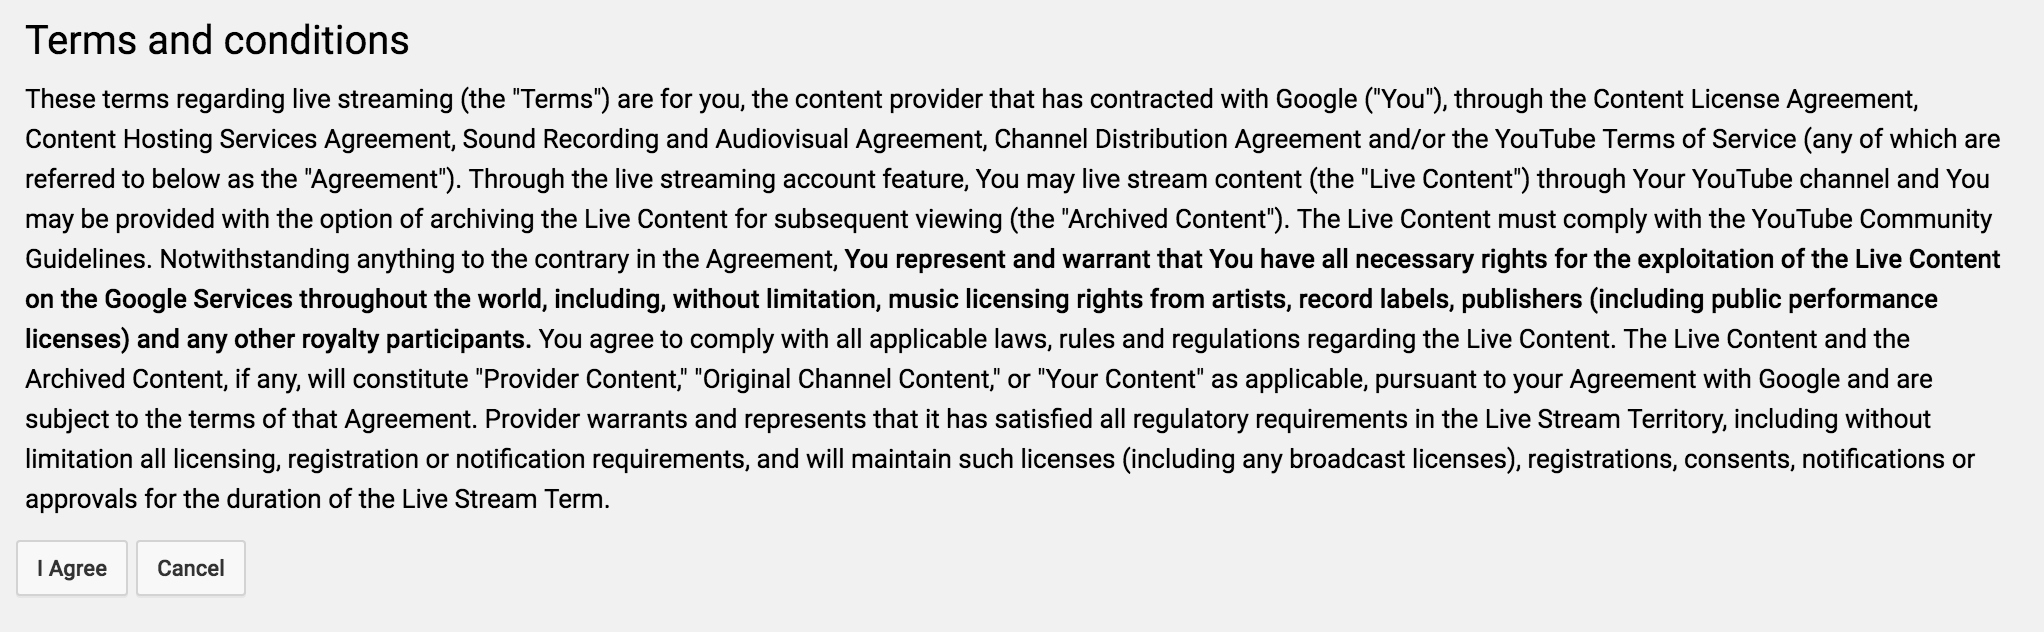 Terms and conditions for streaming content